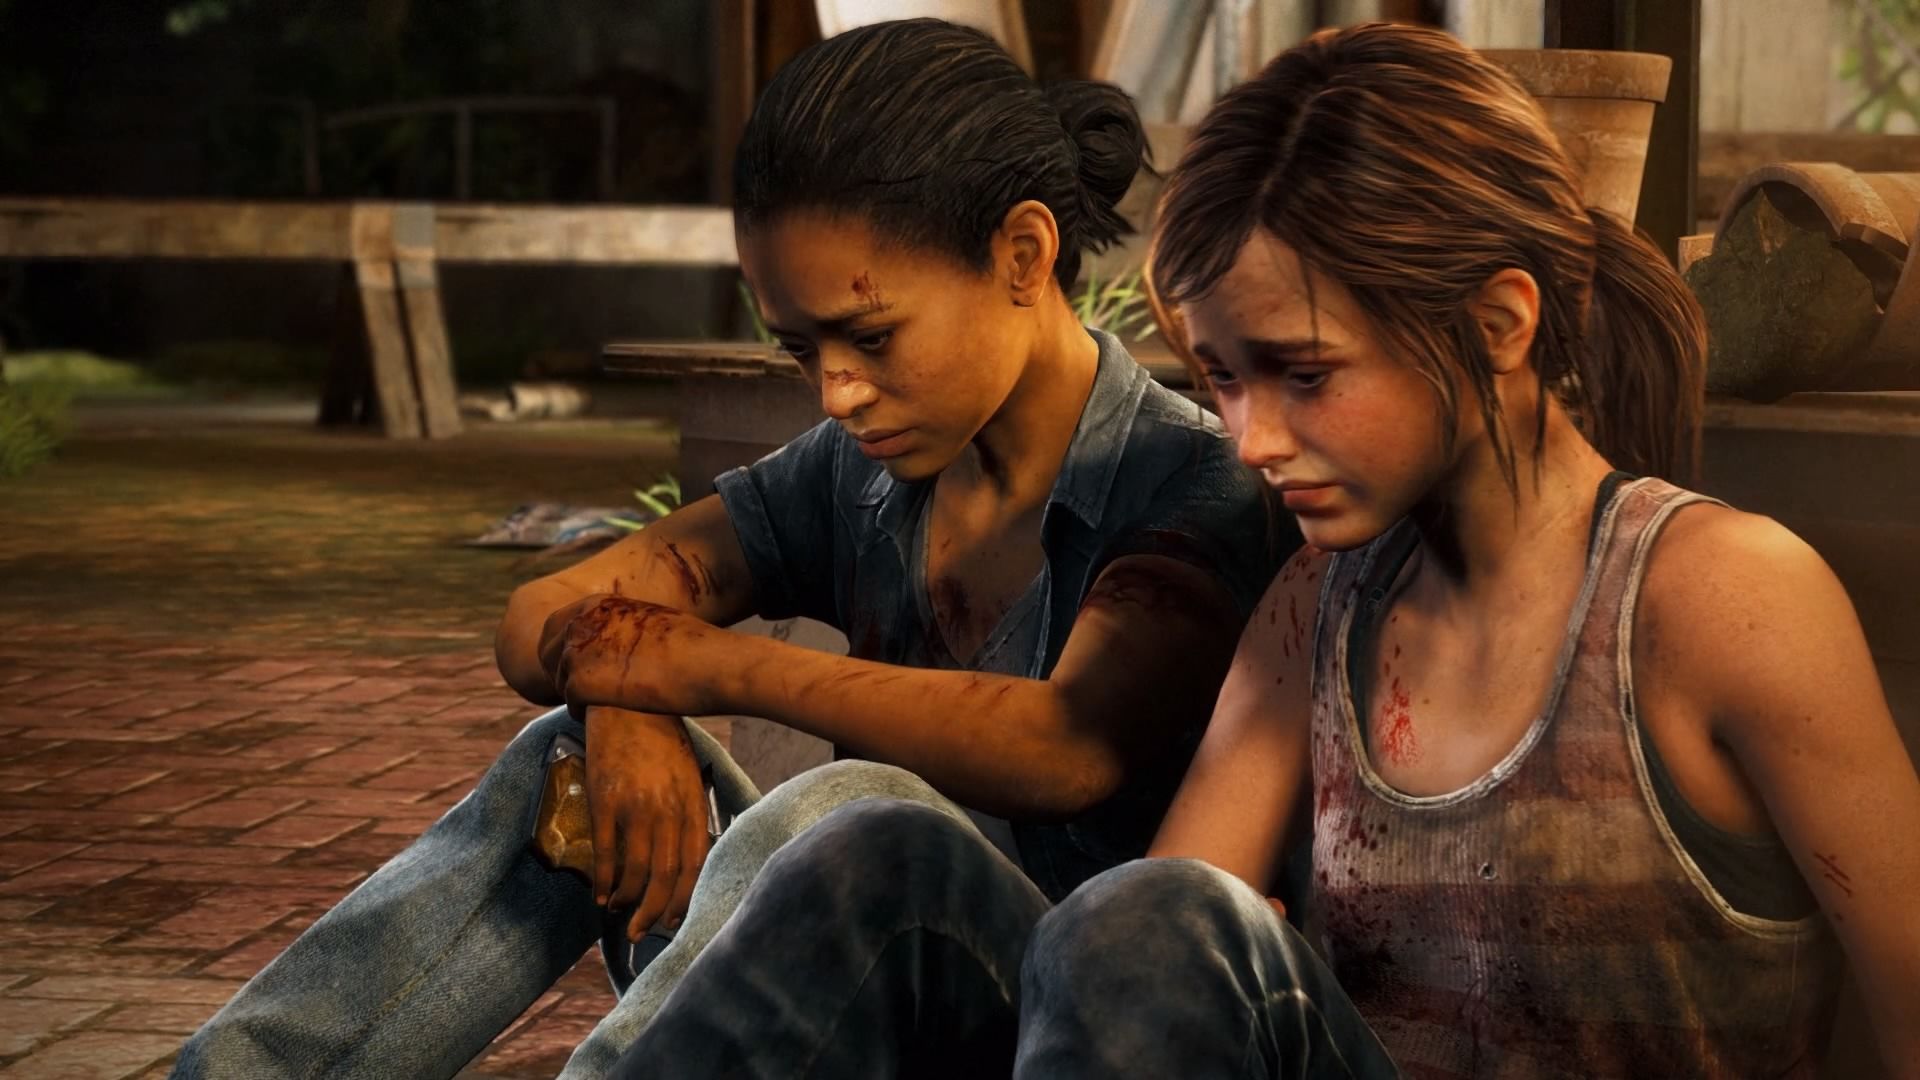 Ellie and Riley sit next to each other on the ground, both looking at the floor in front of them with worried expressions.